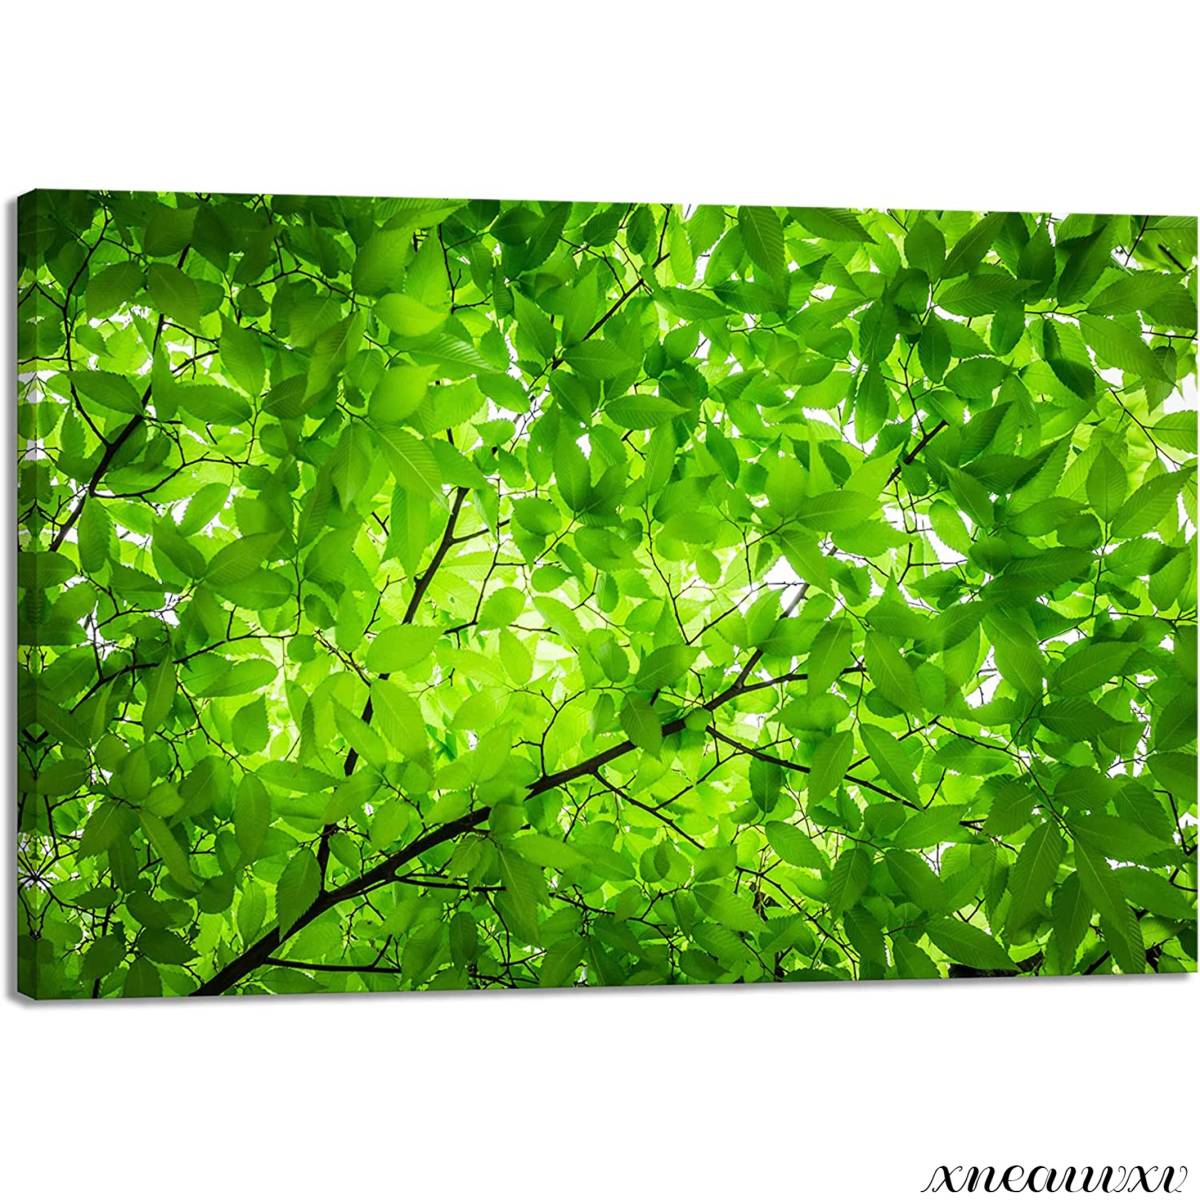 Colorful art panel, nature, green leaves, interior, wall hanging, room decoration, decoration, canvas, painting, stylish, art, appreciation, redecoration, interior, living room, Artwork, Painting, graphic